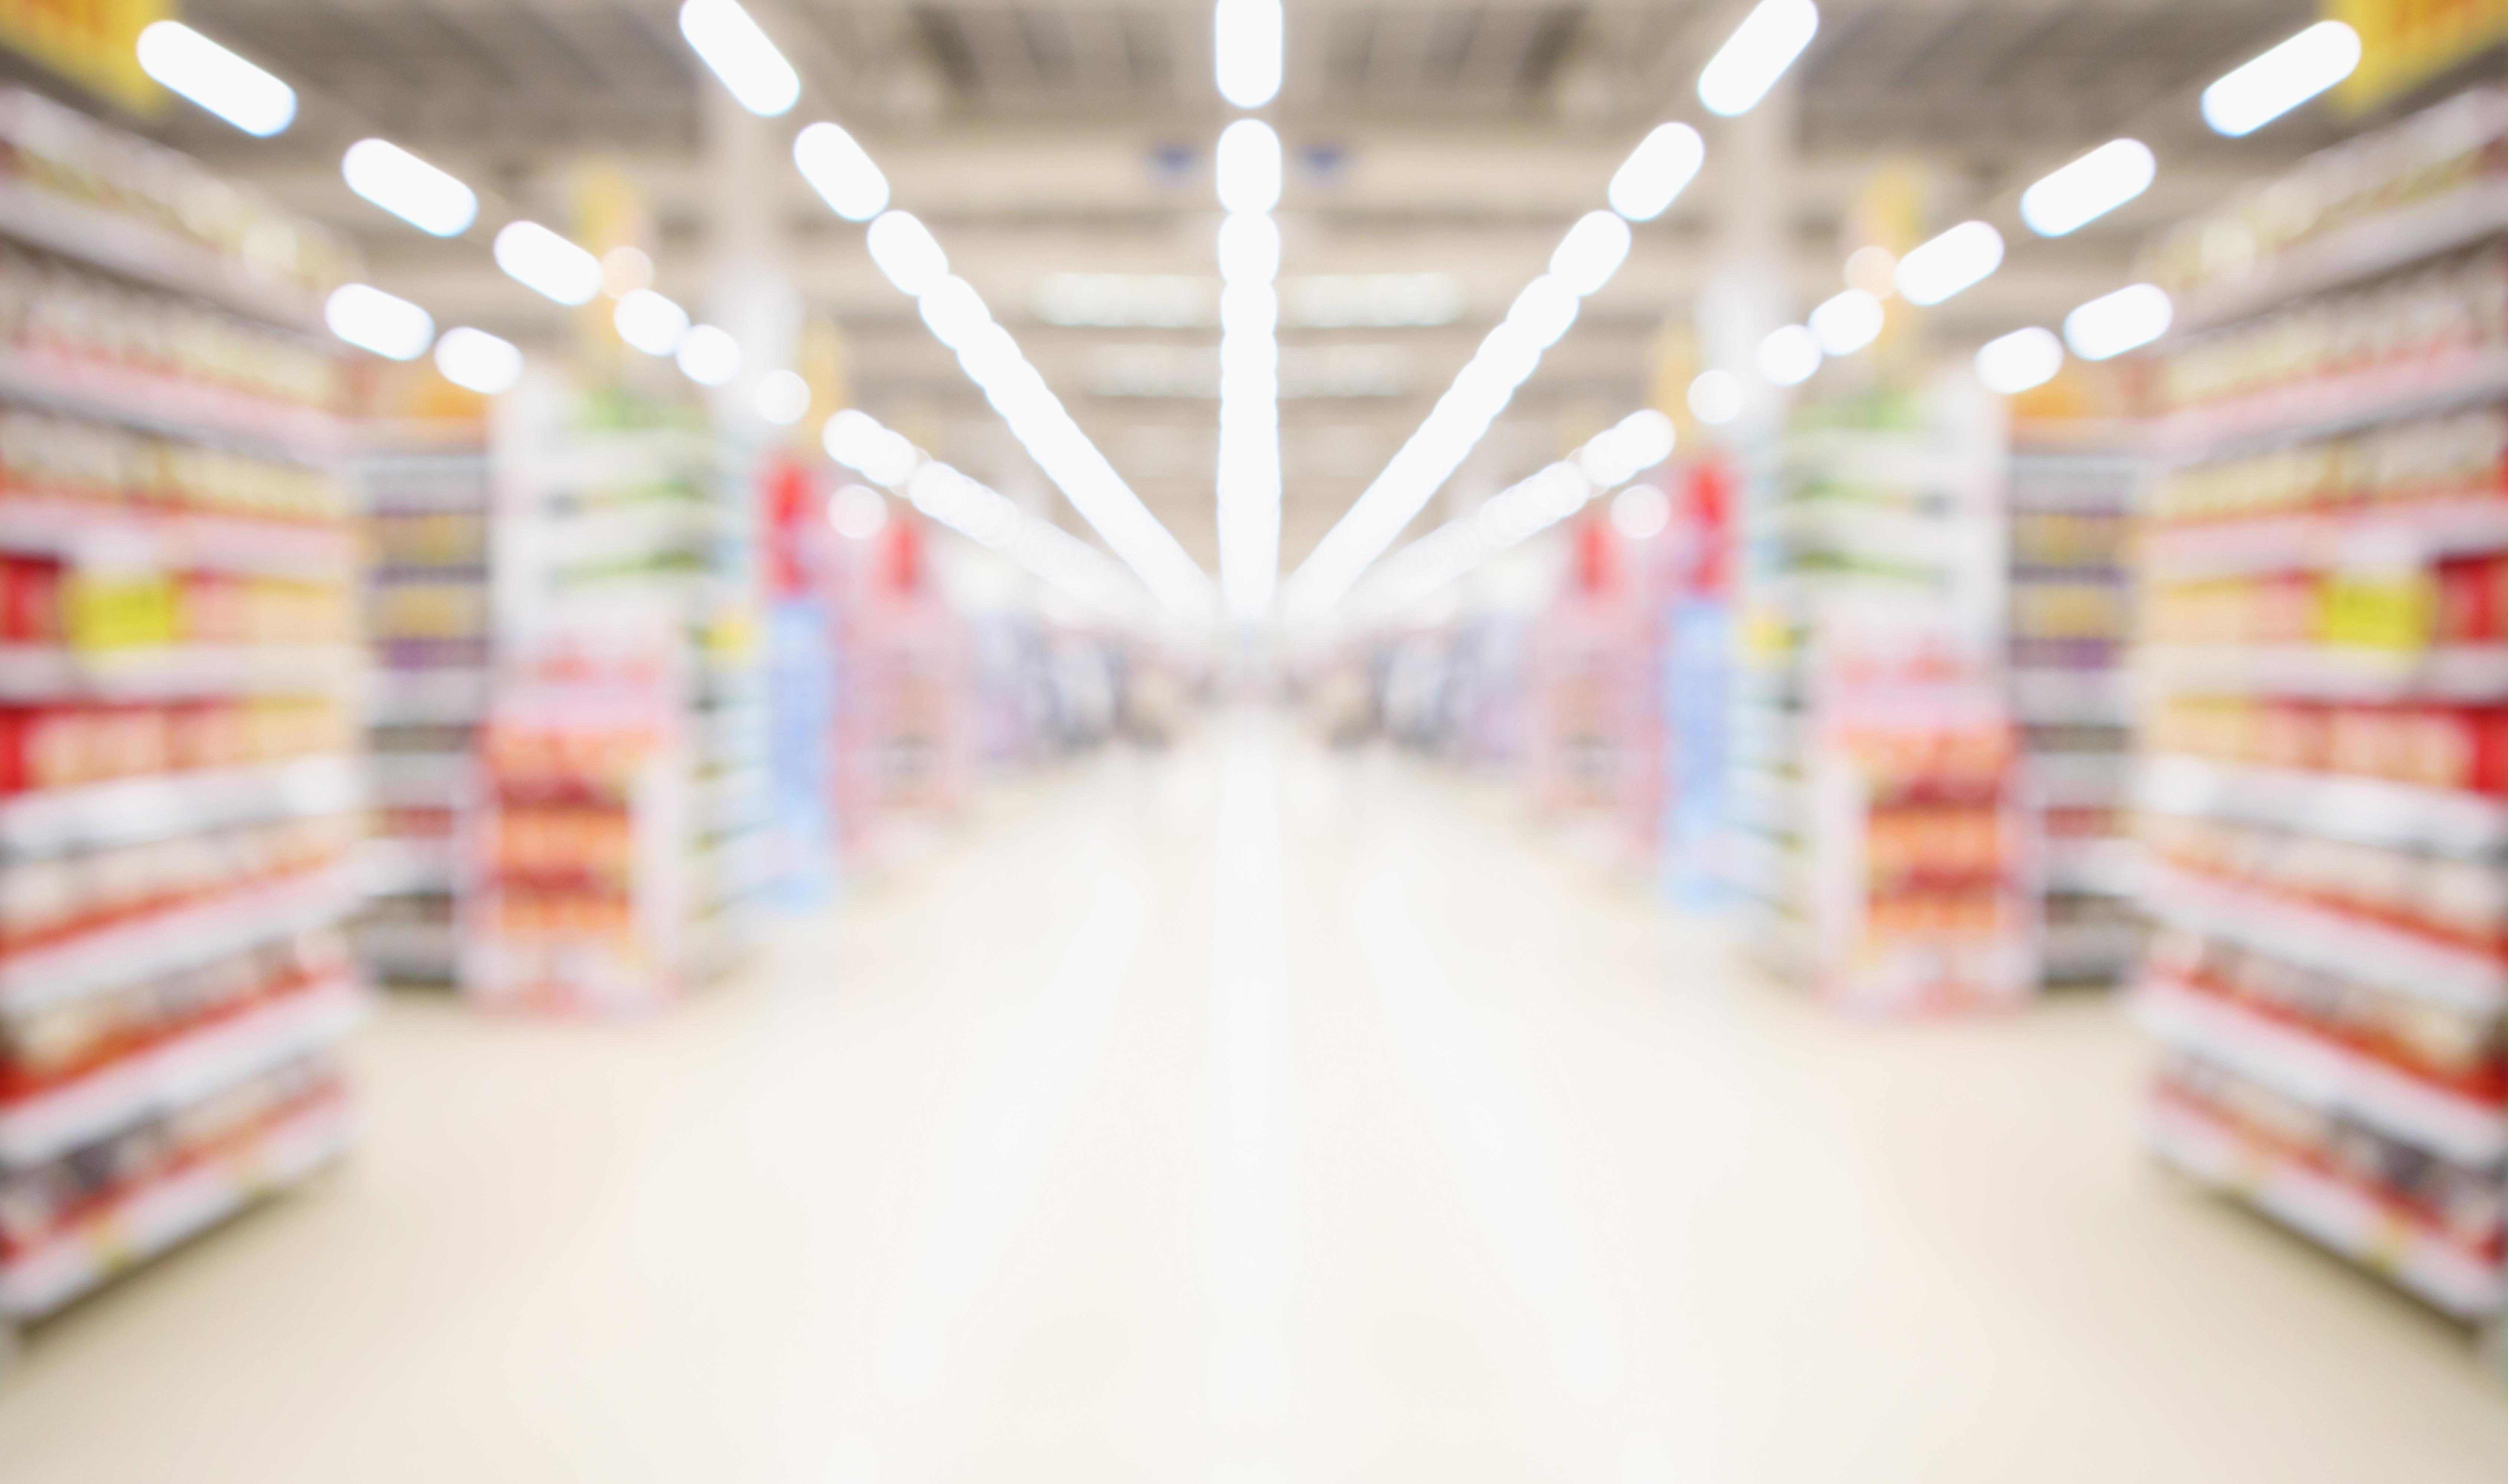  Conducting waste audits at retail stores. Image courtesy of Shutterstock.